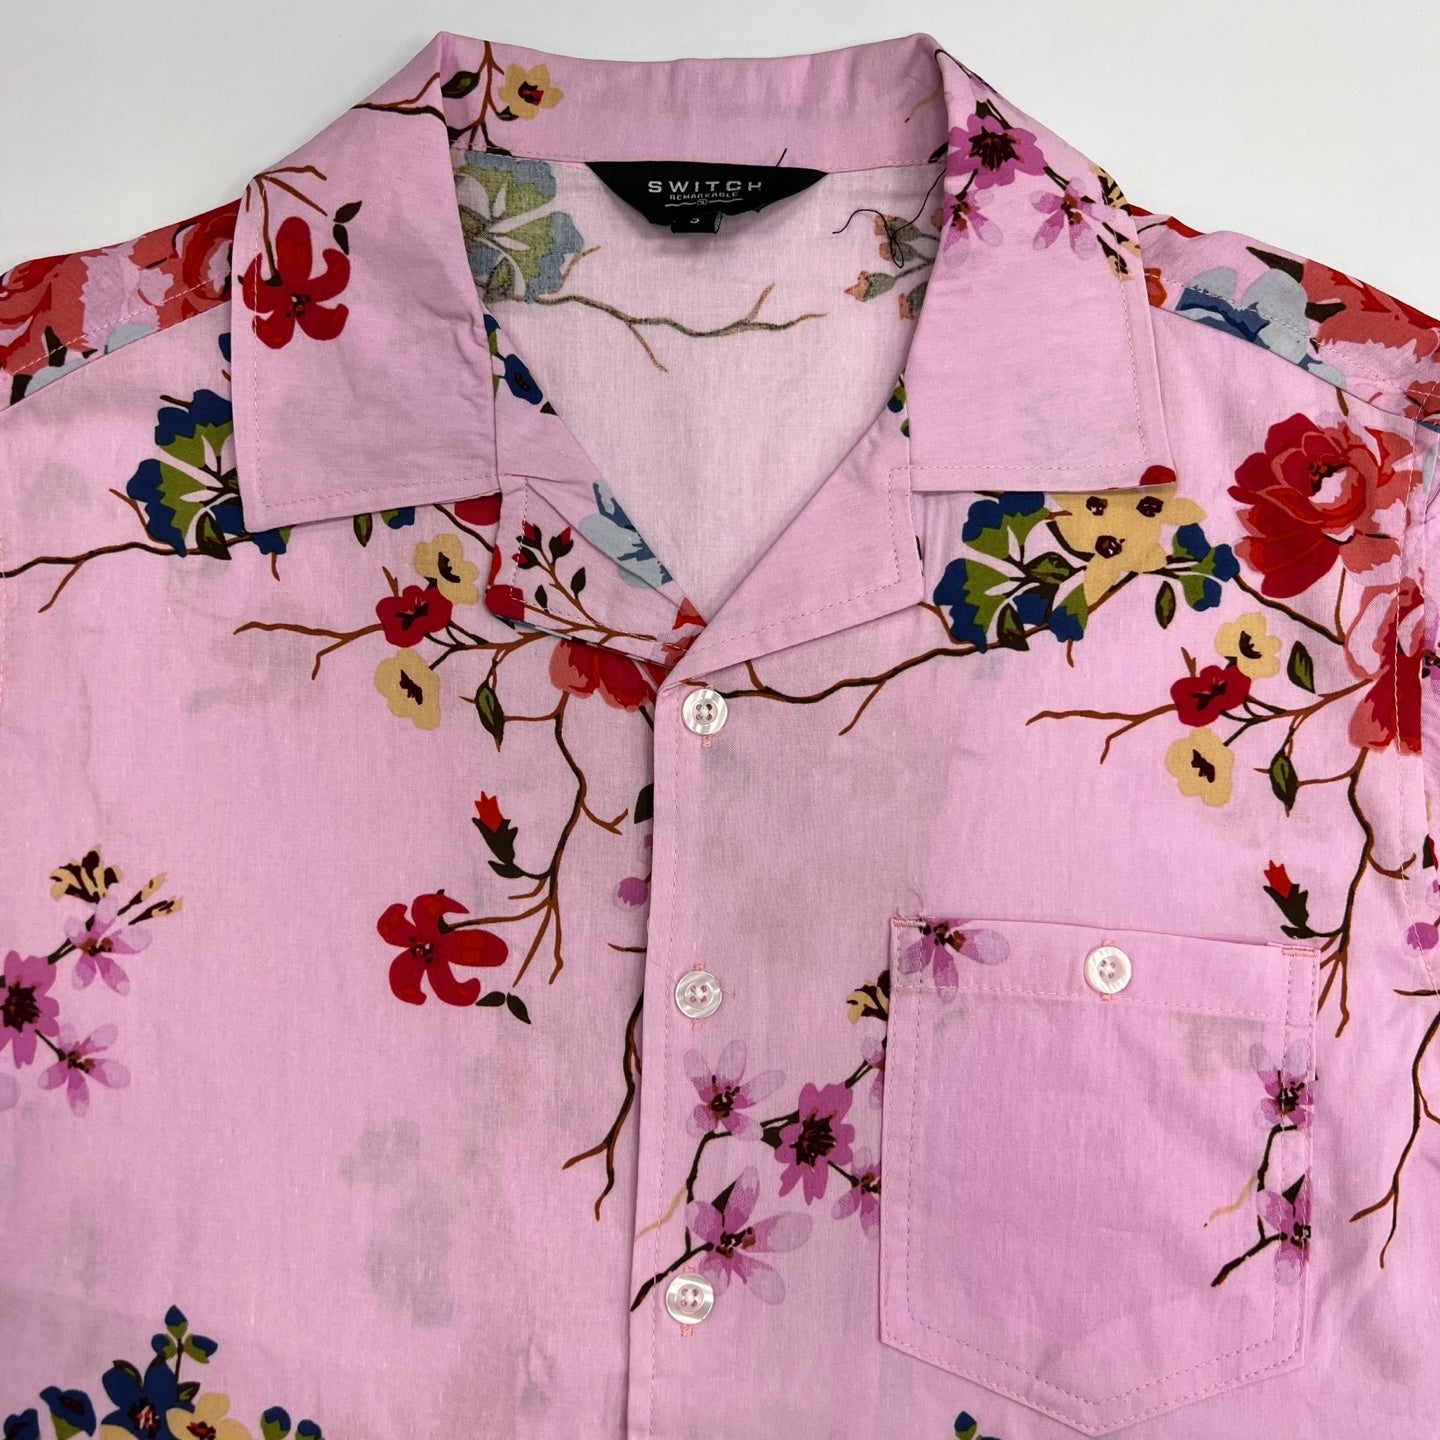 SWTICH Floral Graphic Print Woven Shirts - Pink